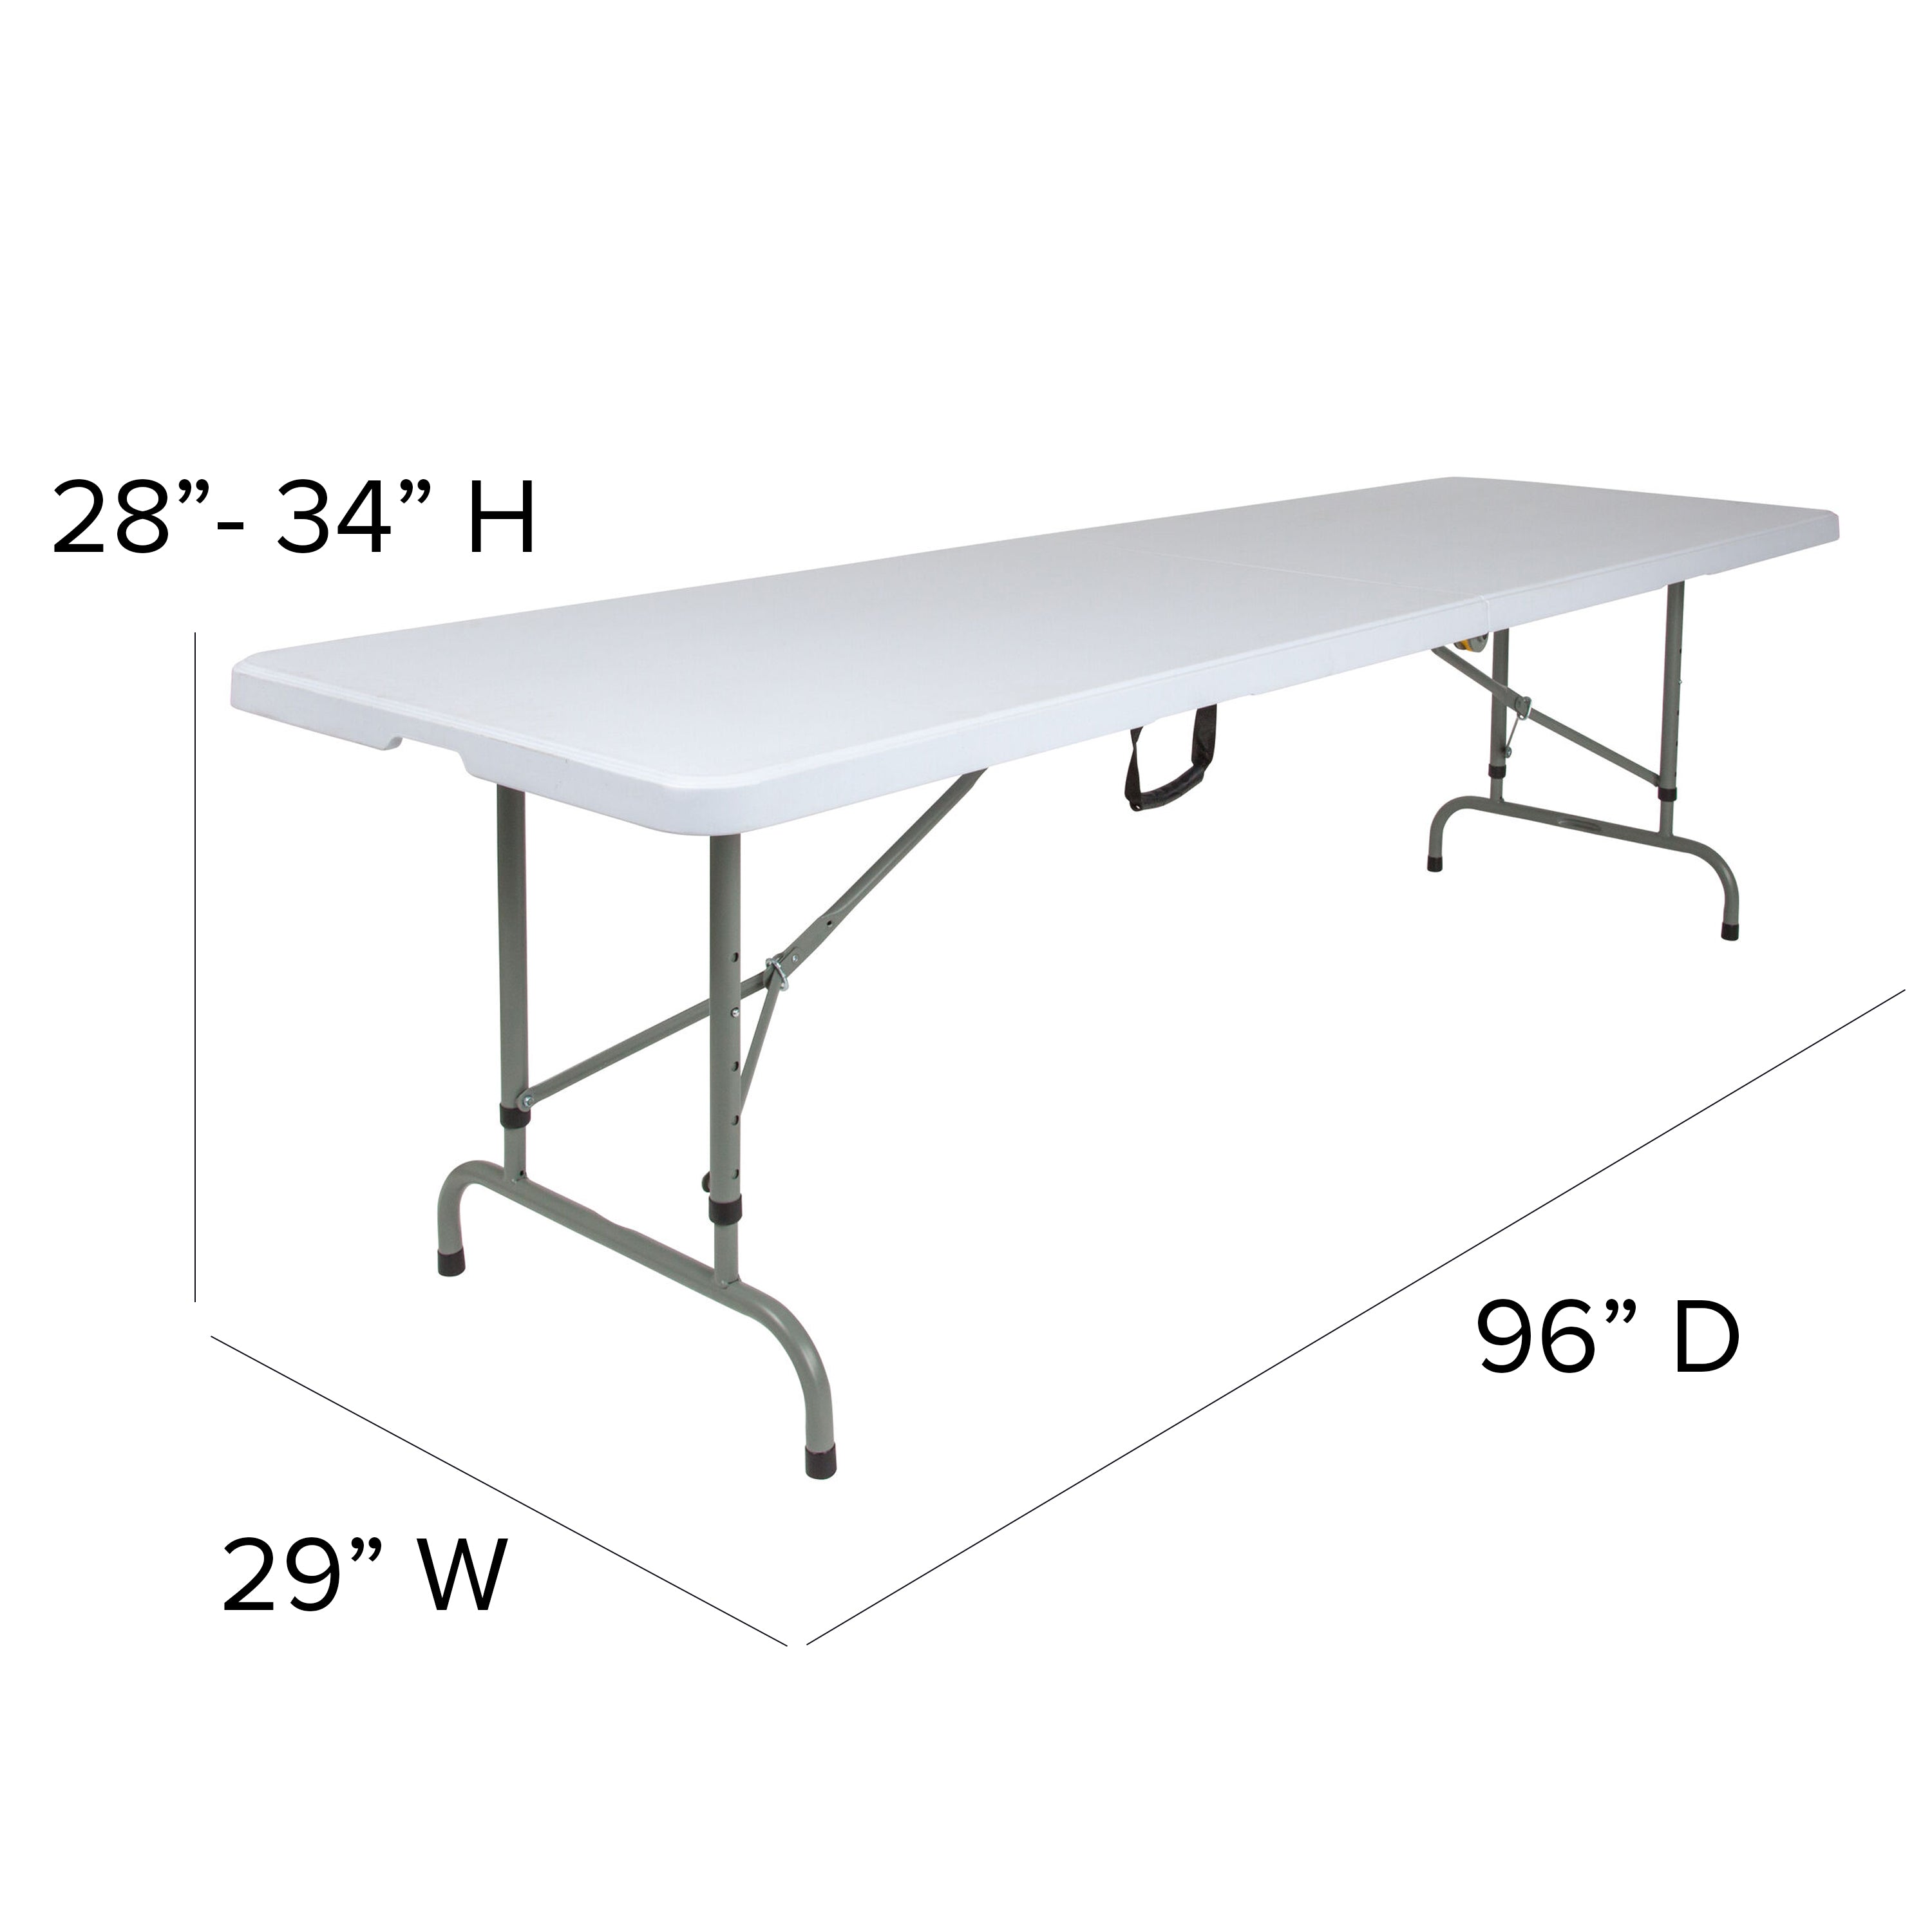 8-Foot Height Adjustable Bi-Fold Plastic Banquet and Event Folding Table with Carrying Handle-Rectangular Plastic Folding Table-Flash Furniture-Wall2Wall Furnishings